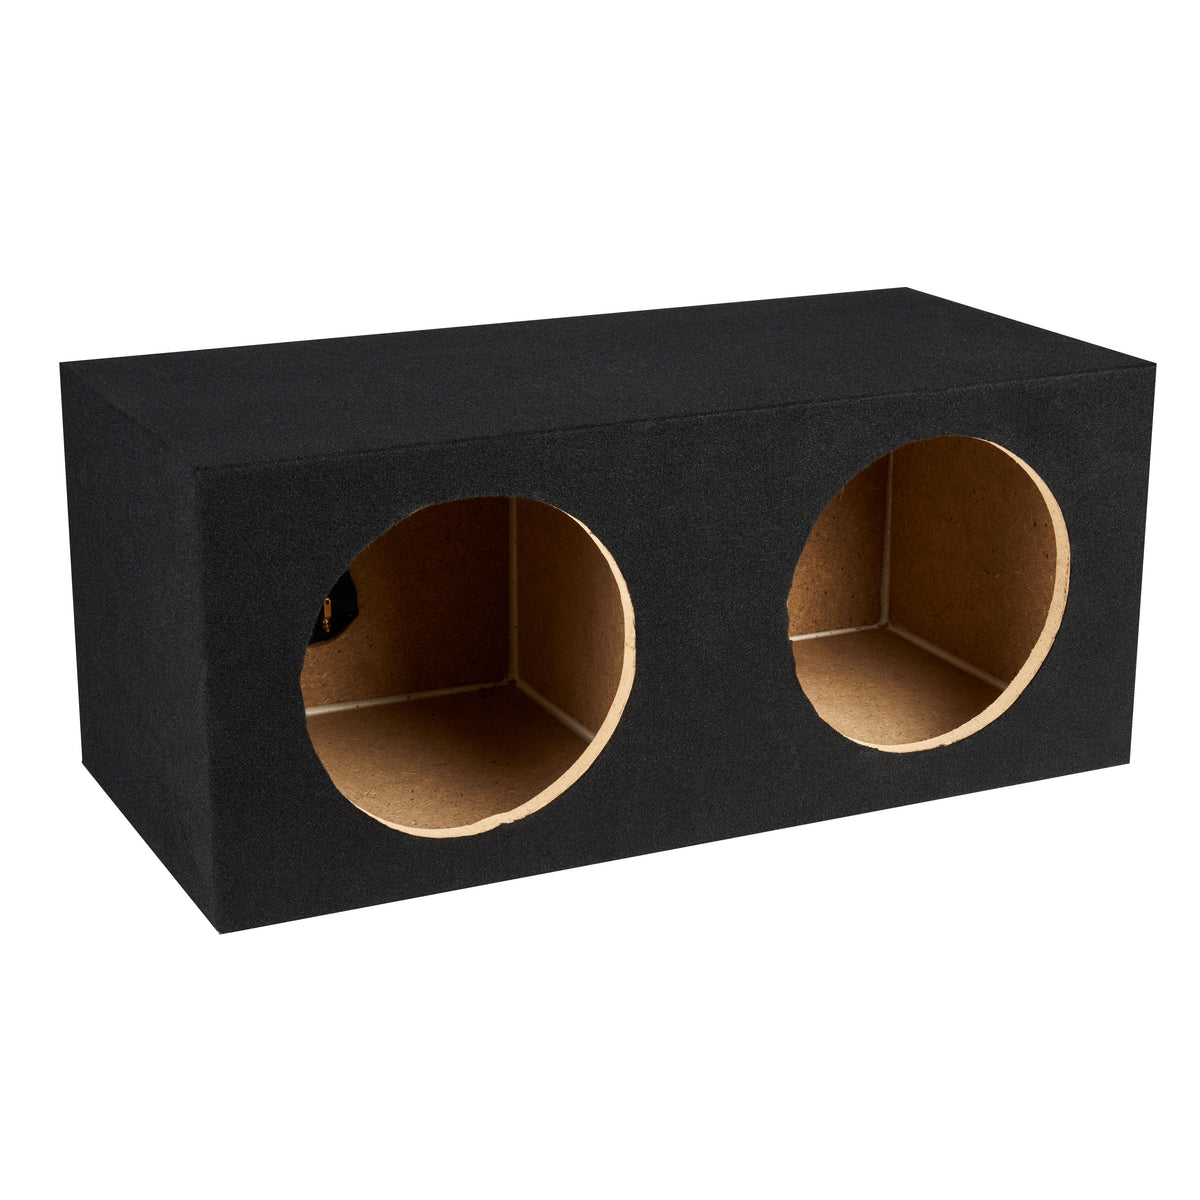 NVX XMDFS102 Dual 10 inch Sealed 3/4in (2.0 Cubic ft) MDF Black Carpeted Subwoofer Enclosure (Made in The Usa)